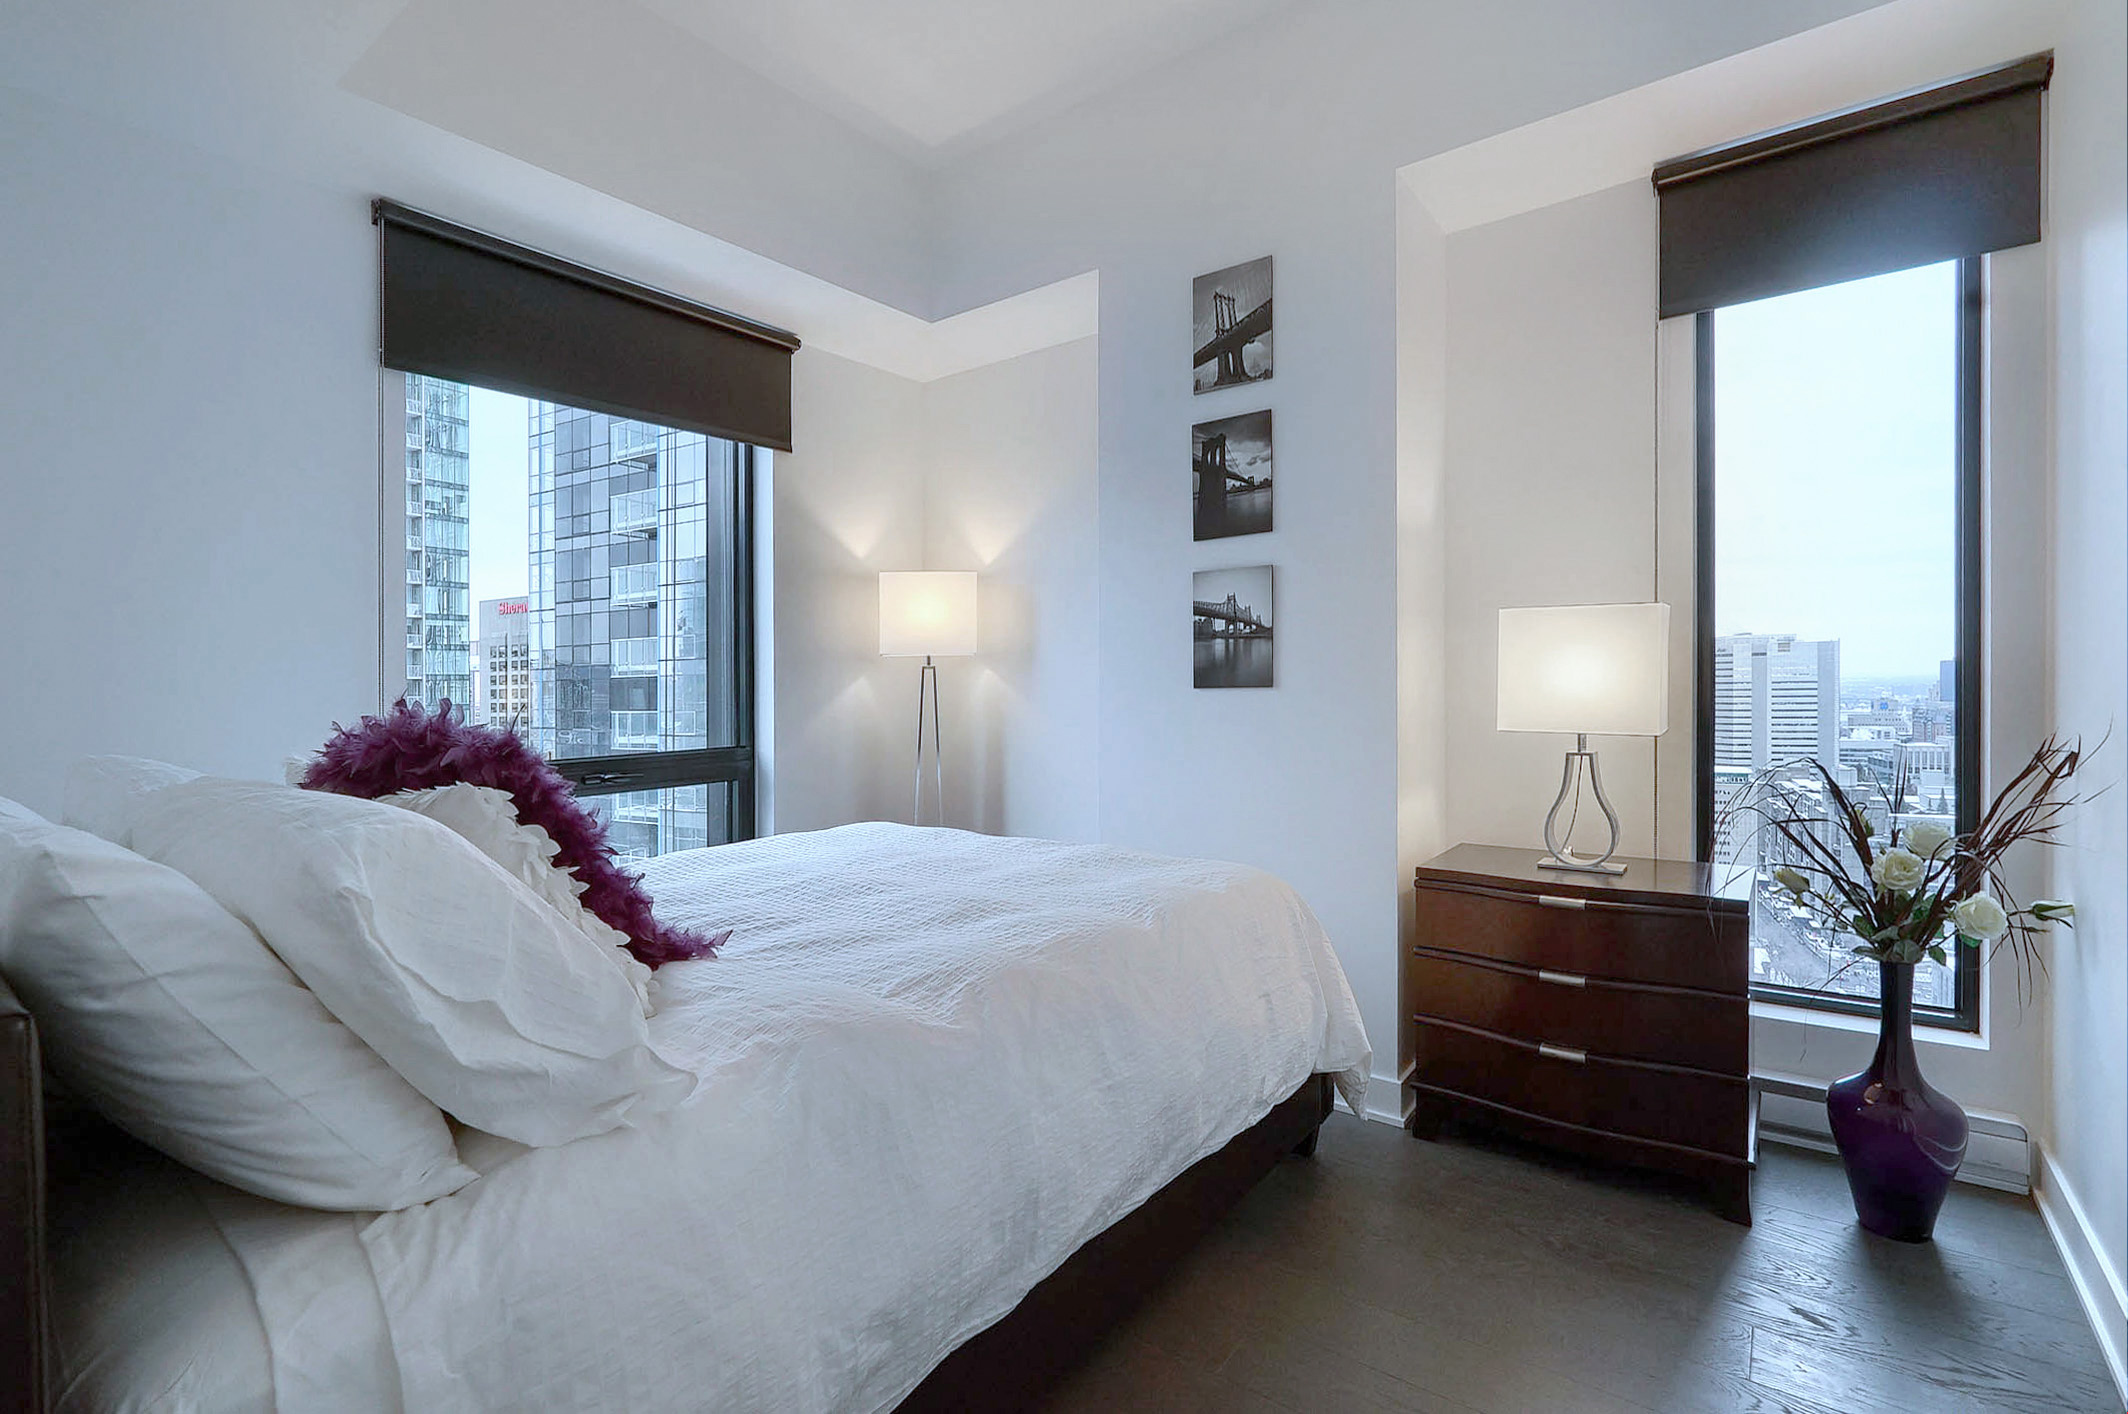 Peek into the bedroom showing the unique bedding and two floor-to-ceiling windows brightening your morning in this furnished executive housing apartment in Montreal